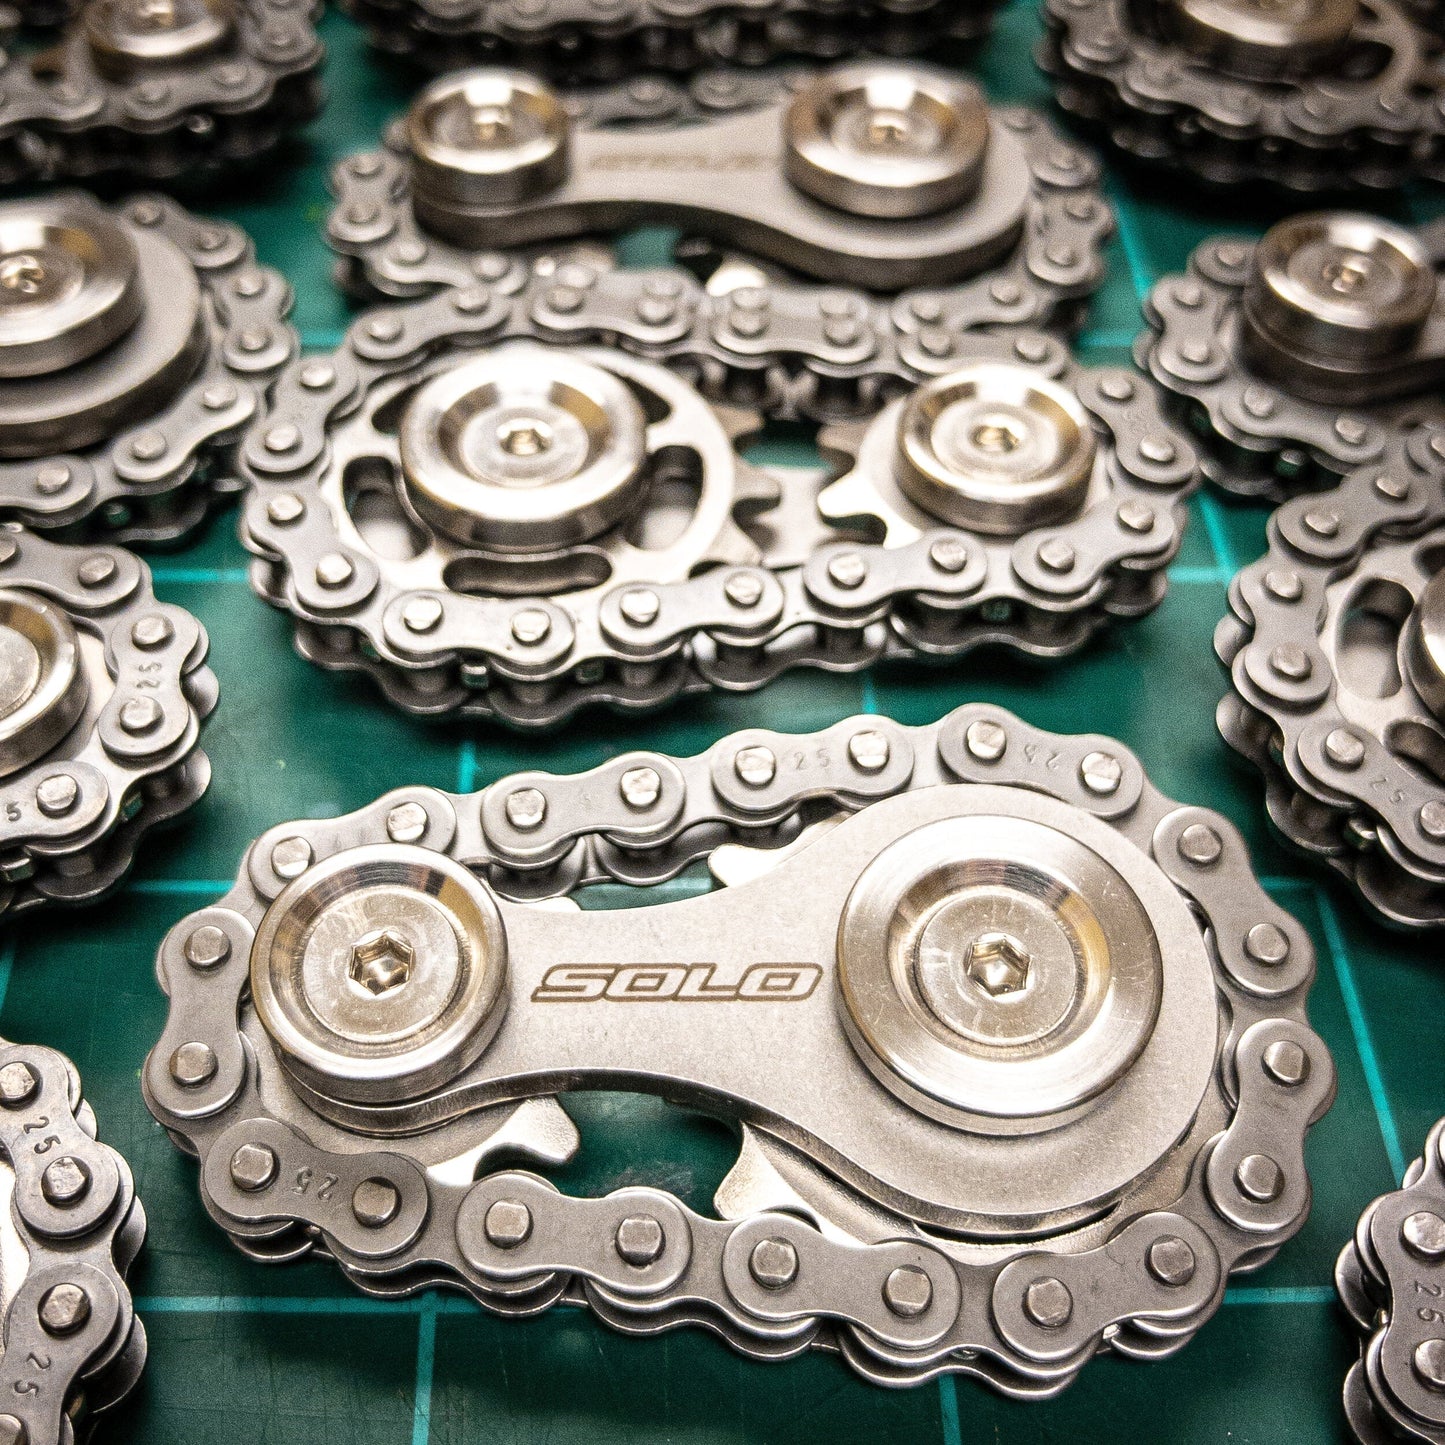 Bicycle Chain Gear Fidget Spinner